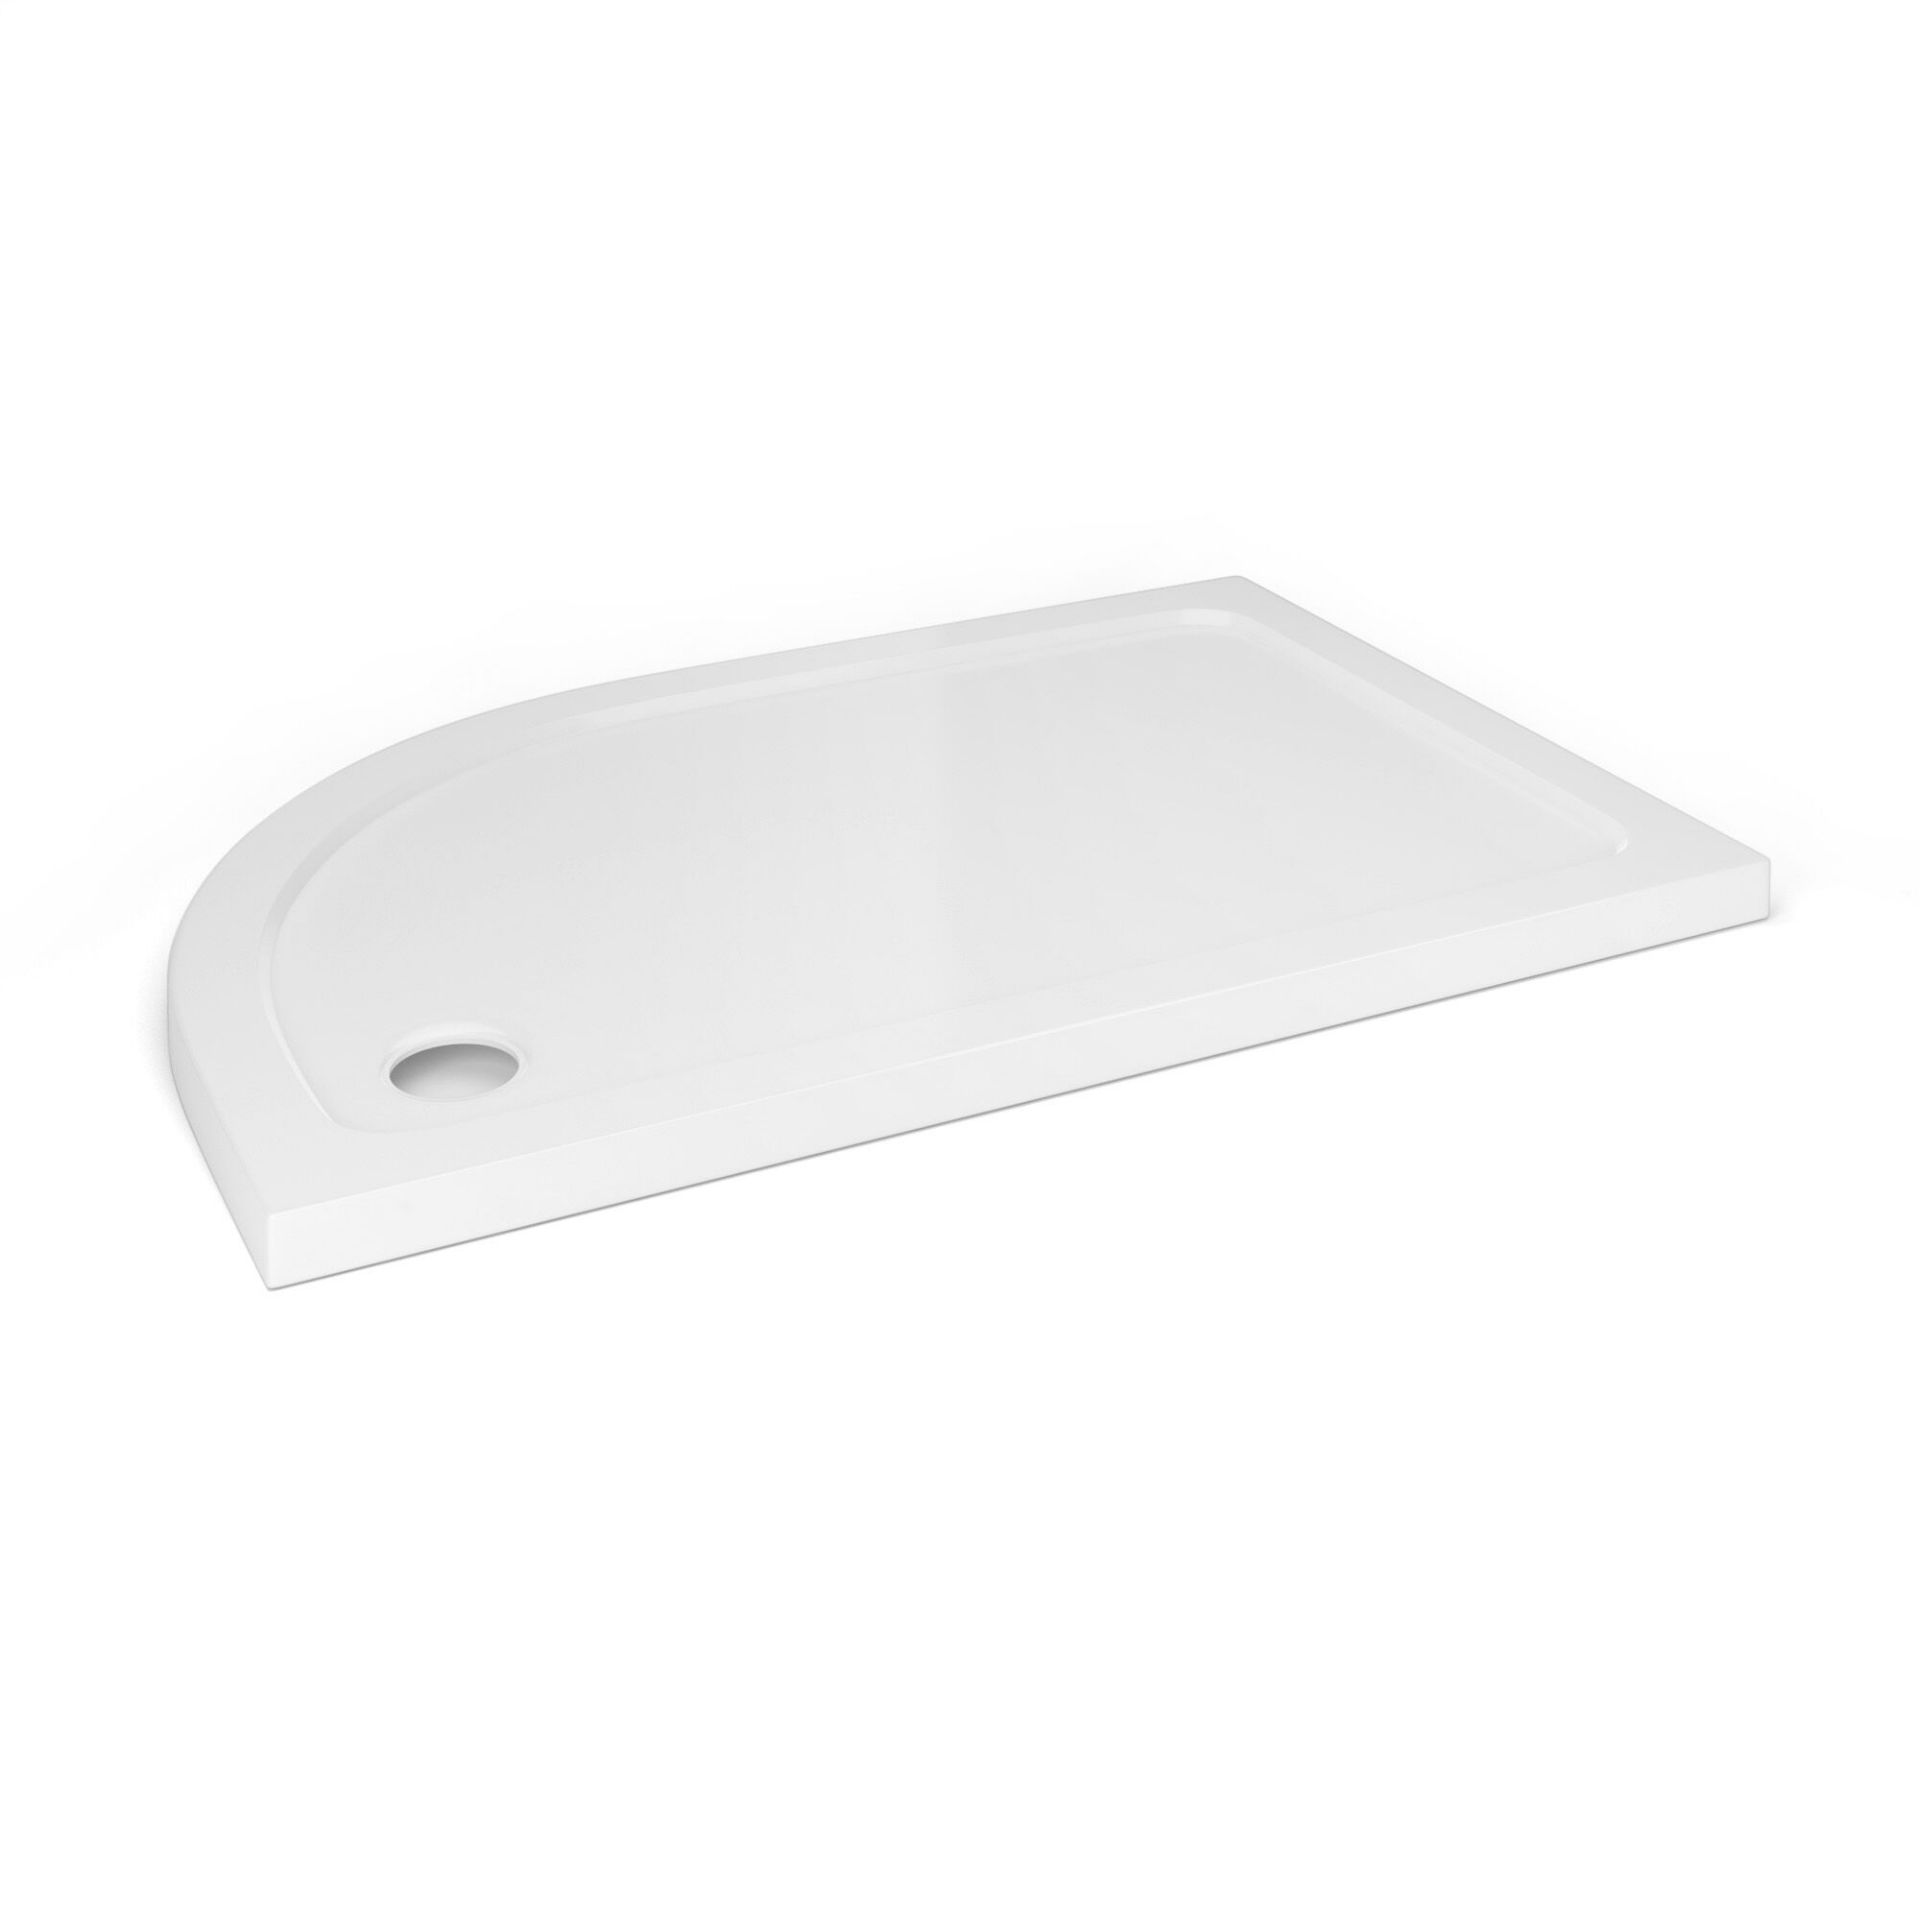 (CP132) 1200x800mm Offset Quadrant Ultra Slim Stone Shower Tray - Right. RRP £343.99. Low prof... - Image 2 of 2